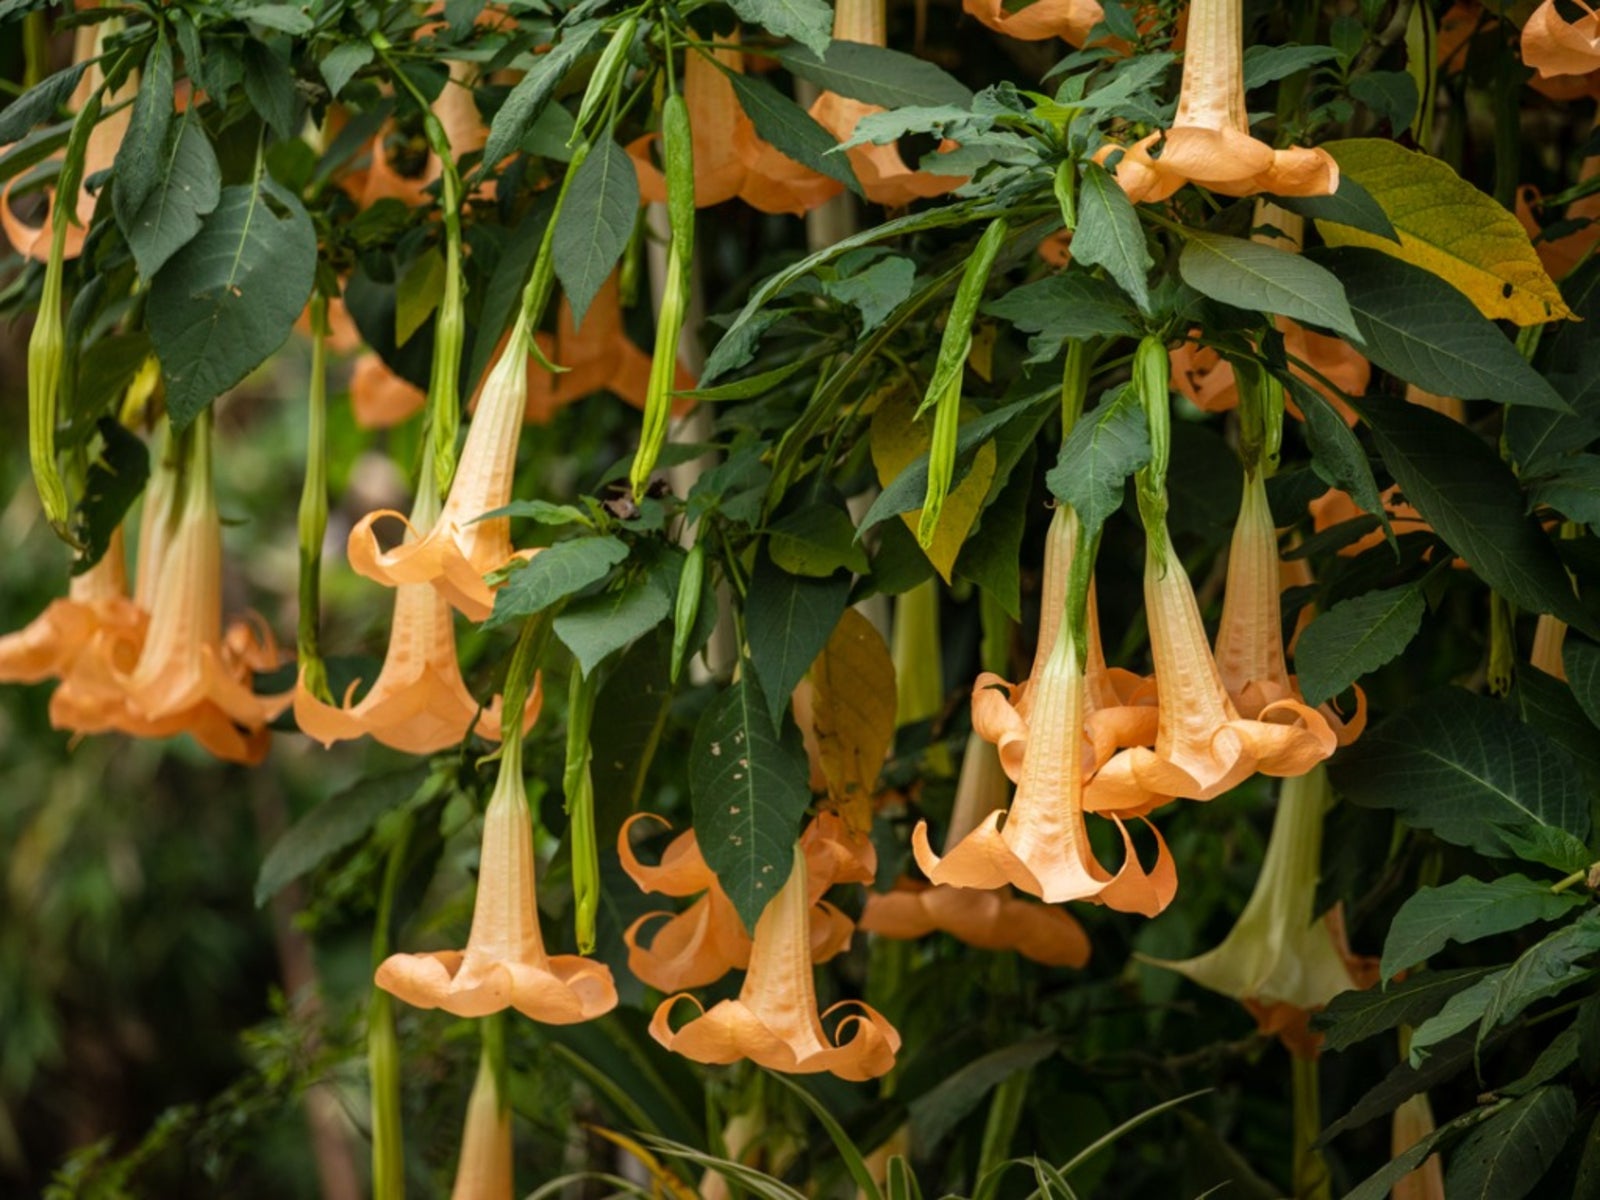 overwintering brugmansia plants - learn about brugmansia cold